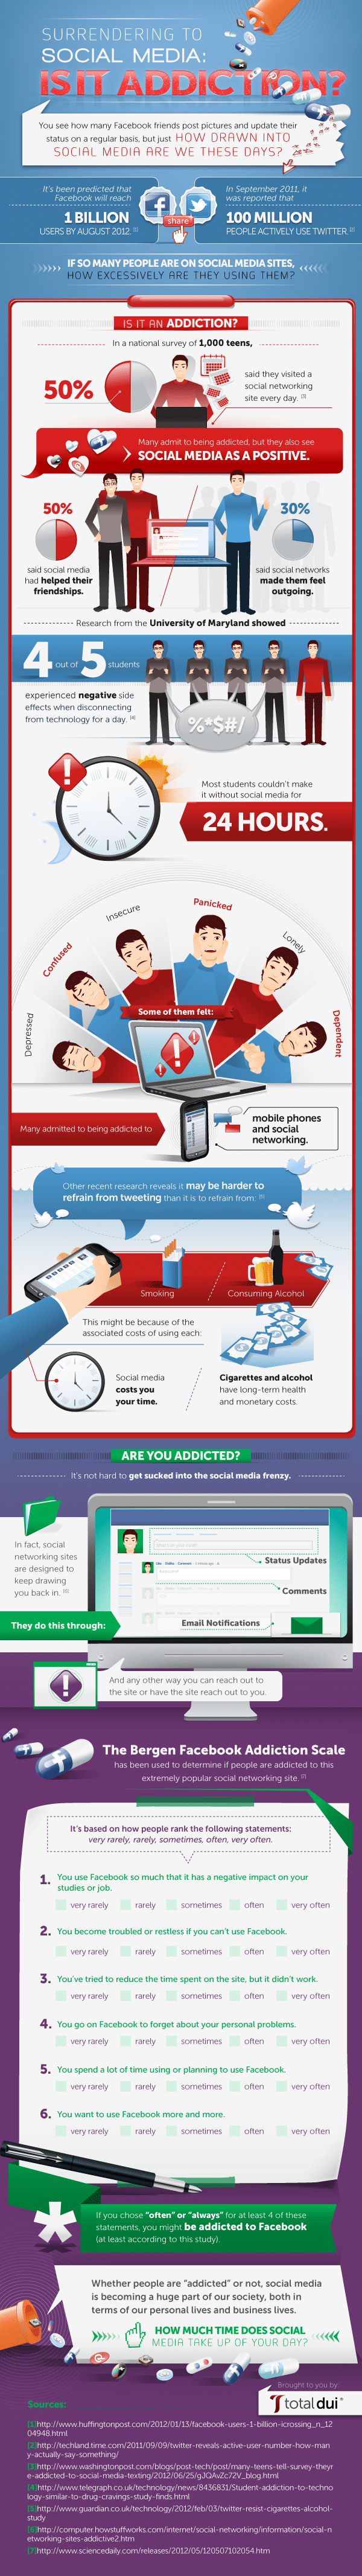 Social Media Addiction: How To Know You’re Addicted [Infographic]